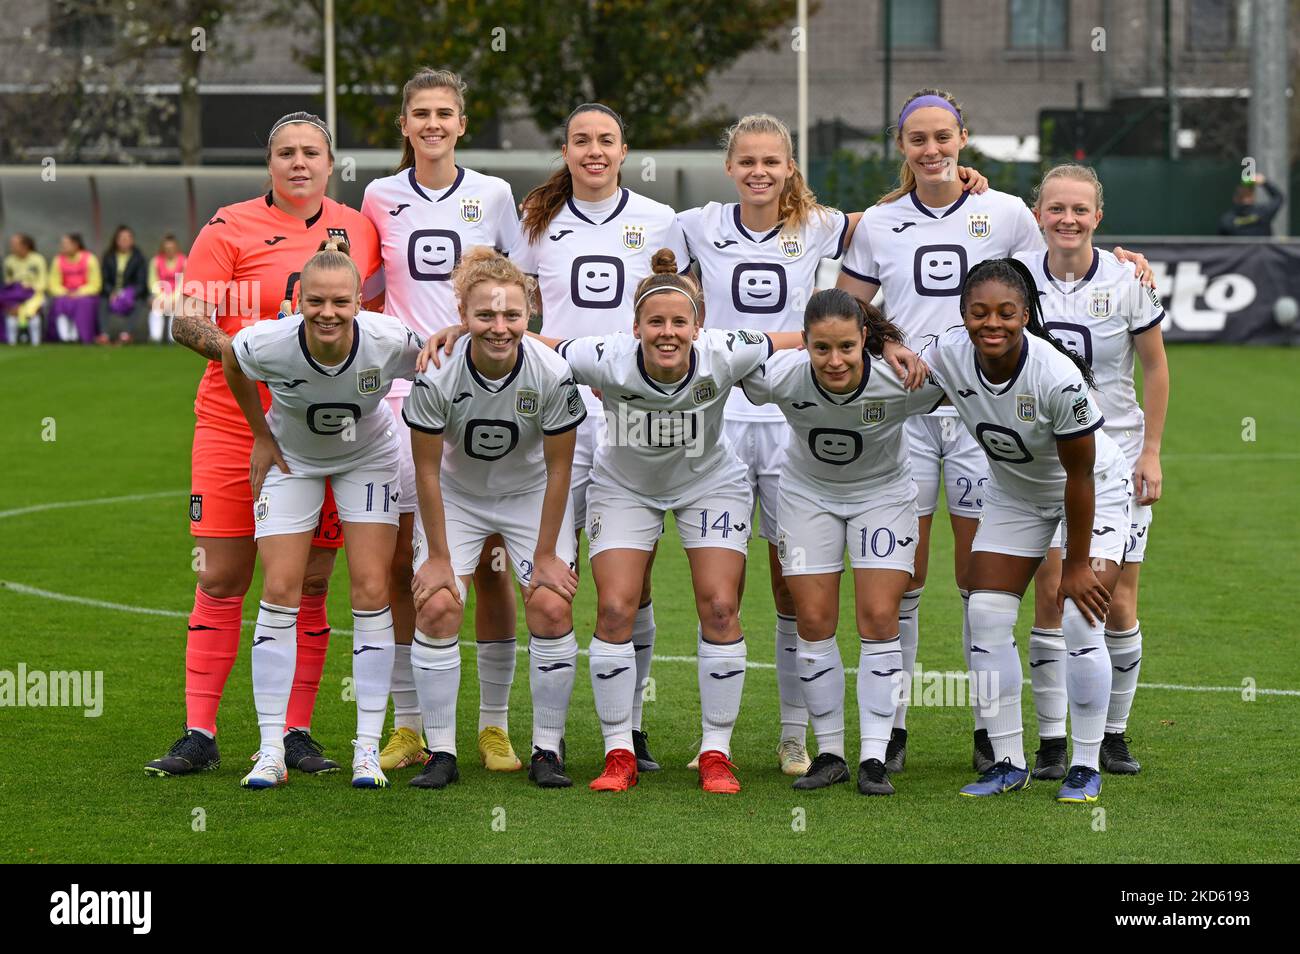 Players of Anderlecht with Justin Odeurs , Marie Minnaert , Silke Vanwynsberghe , Lore Jacobs , Alexis Thornton , Silke Speeckaert , Sarah Wijnants , Charlotte Tison , Laura Deloose , Stefania Vatafu and Esther Buabadi pictured posing for the teampicture during a female soccer game between AA Gent Ladies and RSC Anderlecht on the 10th matchday of the 2022 - 2023 season of Belgian Lotto Womens Super League , Saturday 15 October 2022  in Oostakker , Belgium . PHOTO SPORTPIX | DAVID CATRY Stock Photo